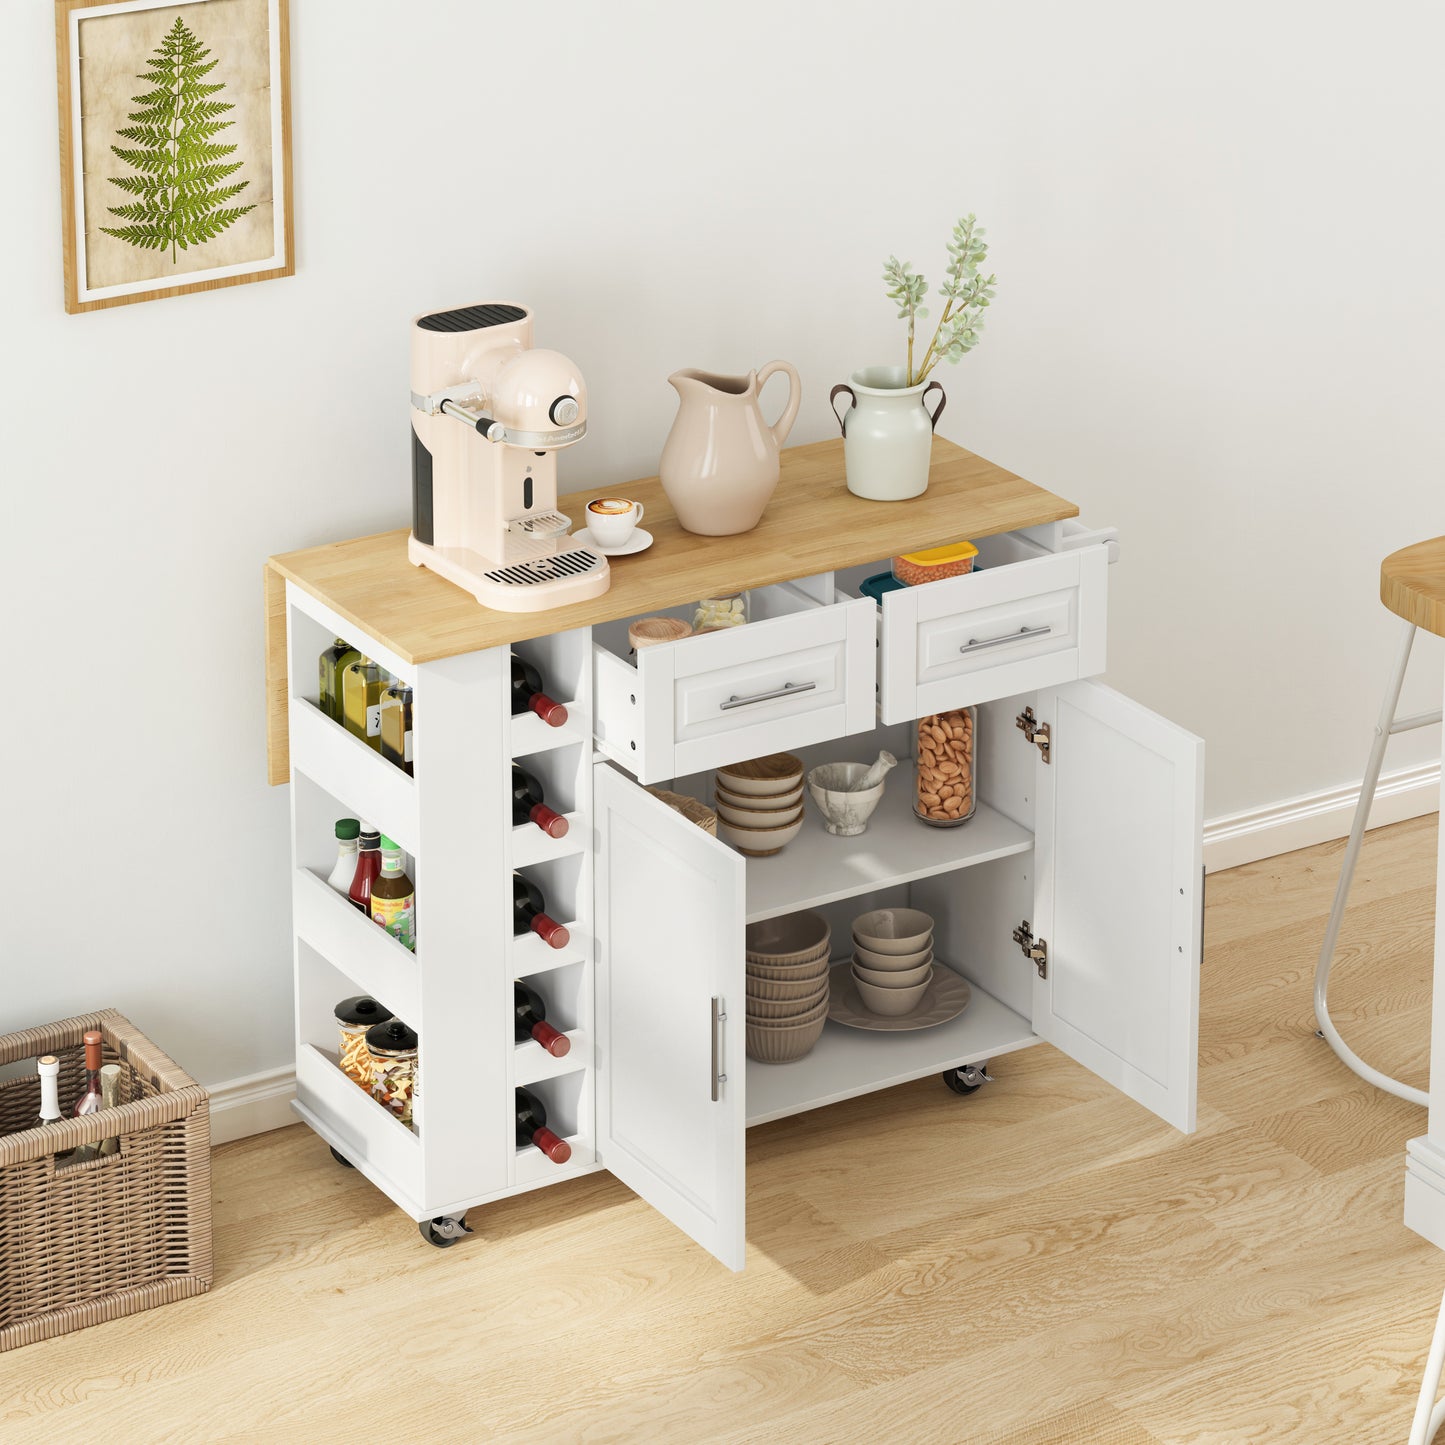 Multi-Functional Kitchen Island Cart with 2 Door Cabinet and Two Drawers,Spice Rack, Towel Holder, Wine Rack, and Foldable Rubberwood Table Top (White)